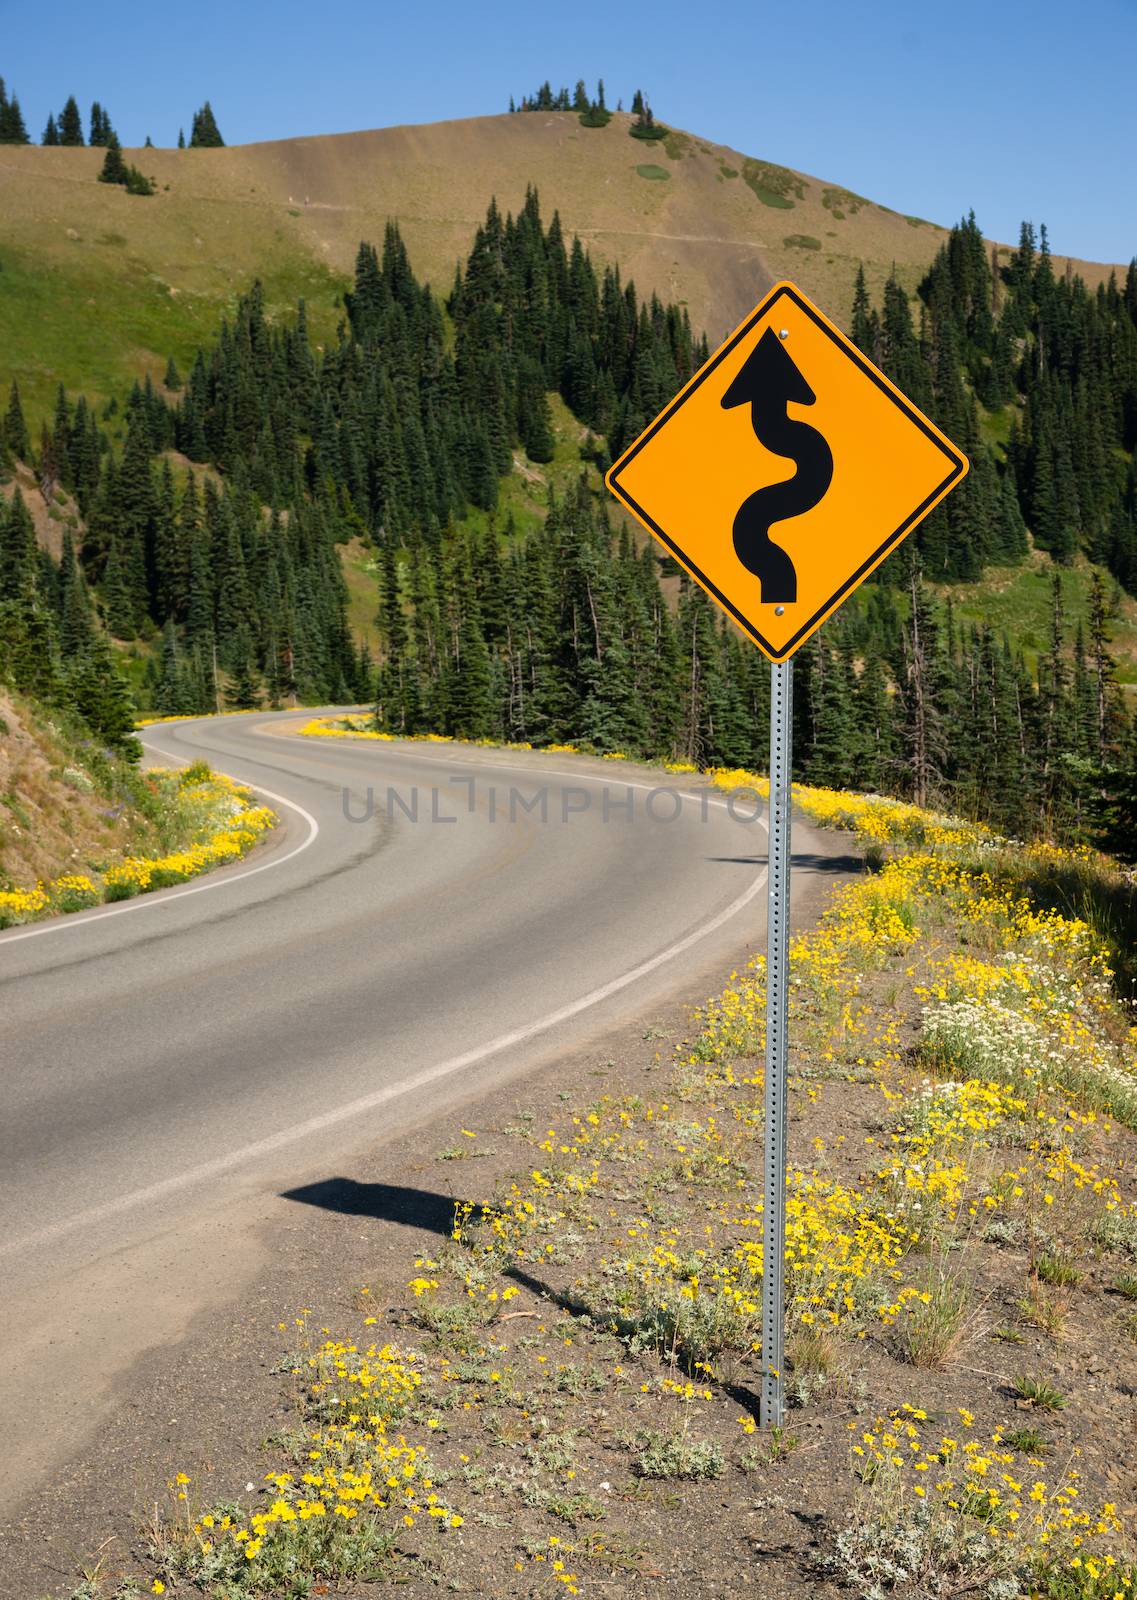 Road Sign Indicates Curves Ahead Mountain Landscape by ChrisBoswell